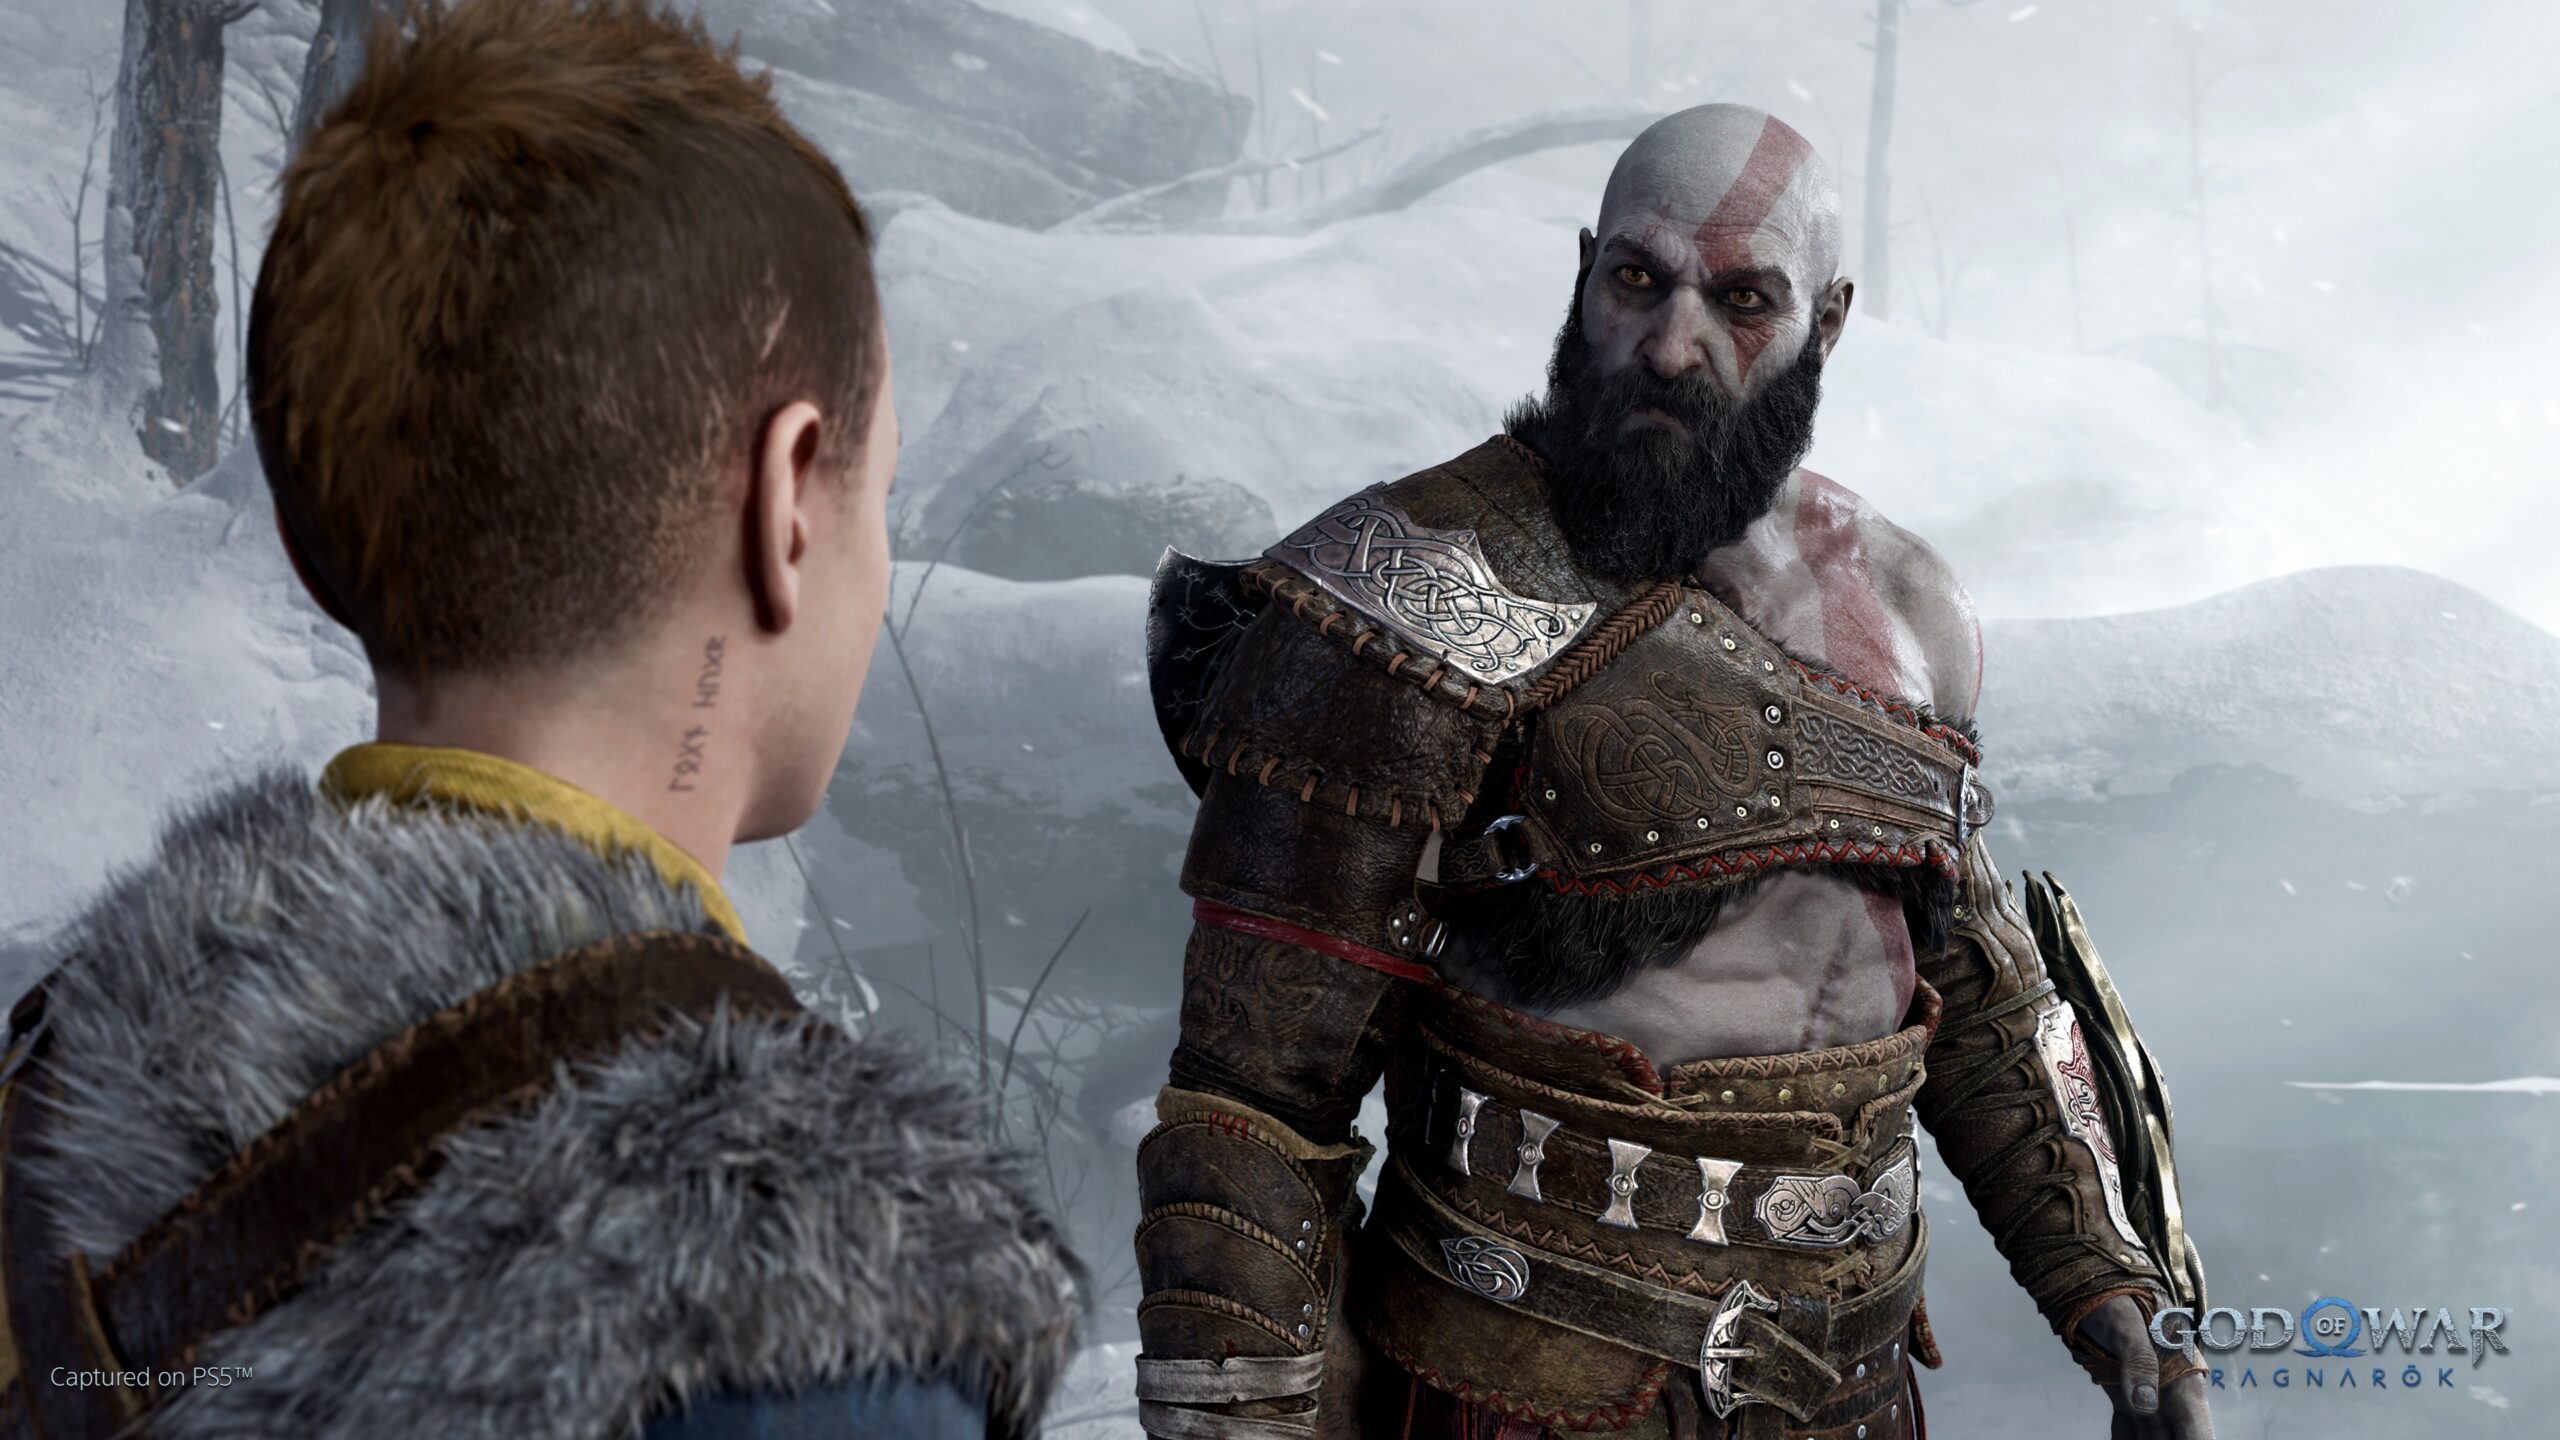 First Baldur, then Thor , now Odin. If they want to hide from the norse  gods first thing to do is change address I suggest : r/GodofWar